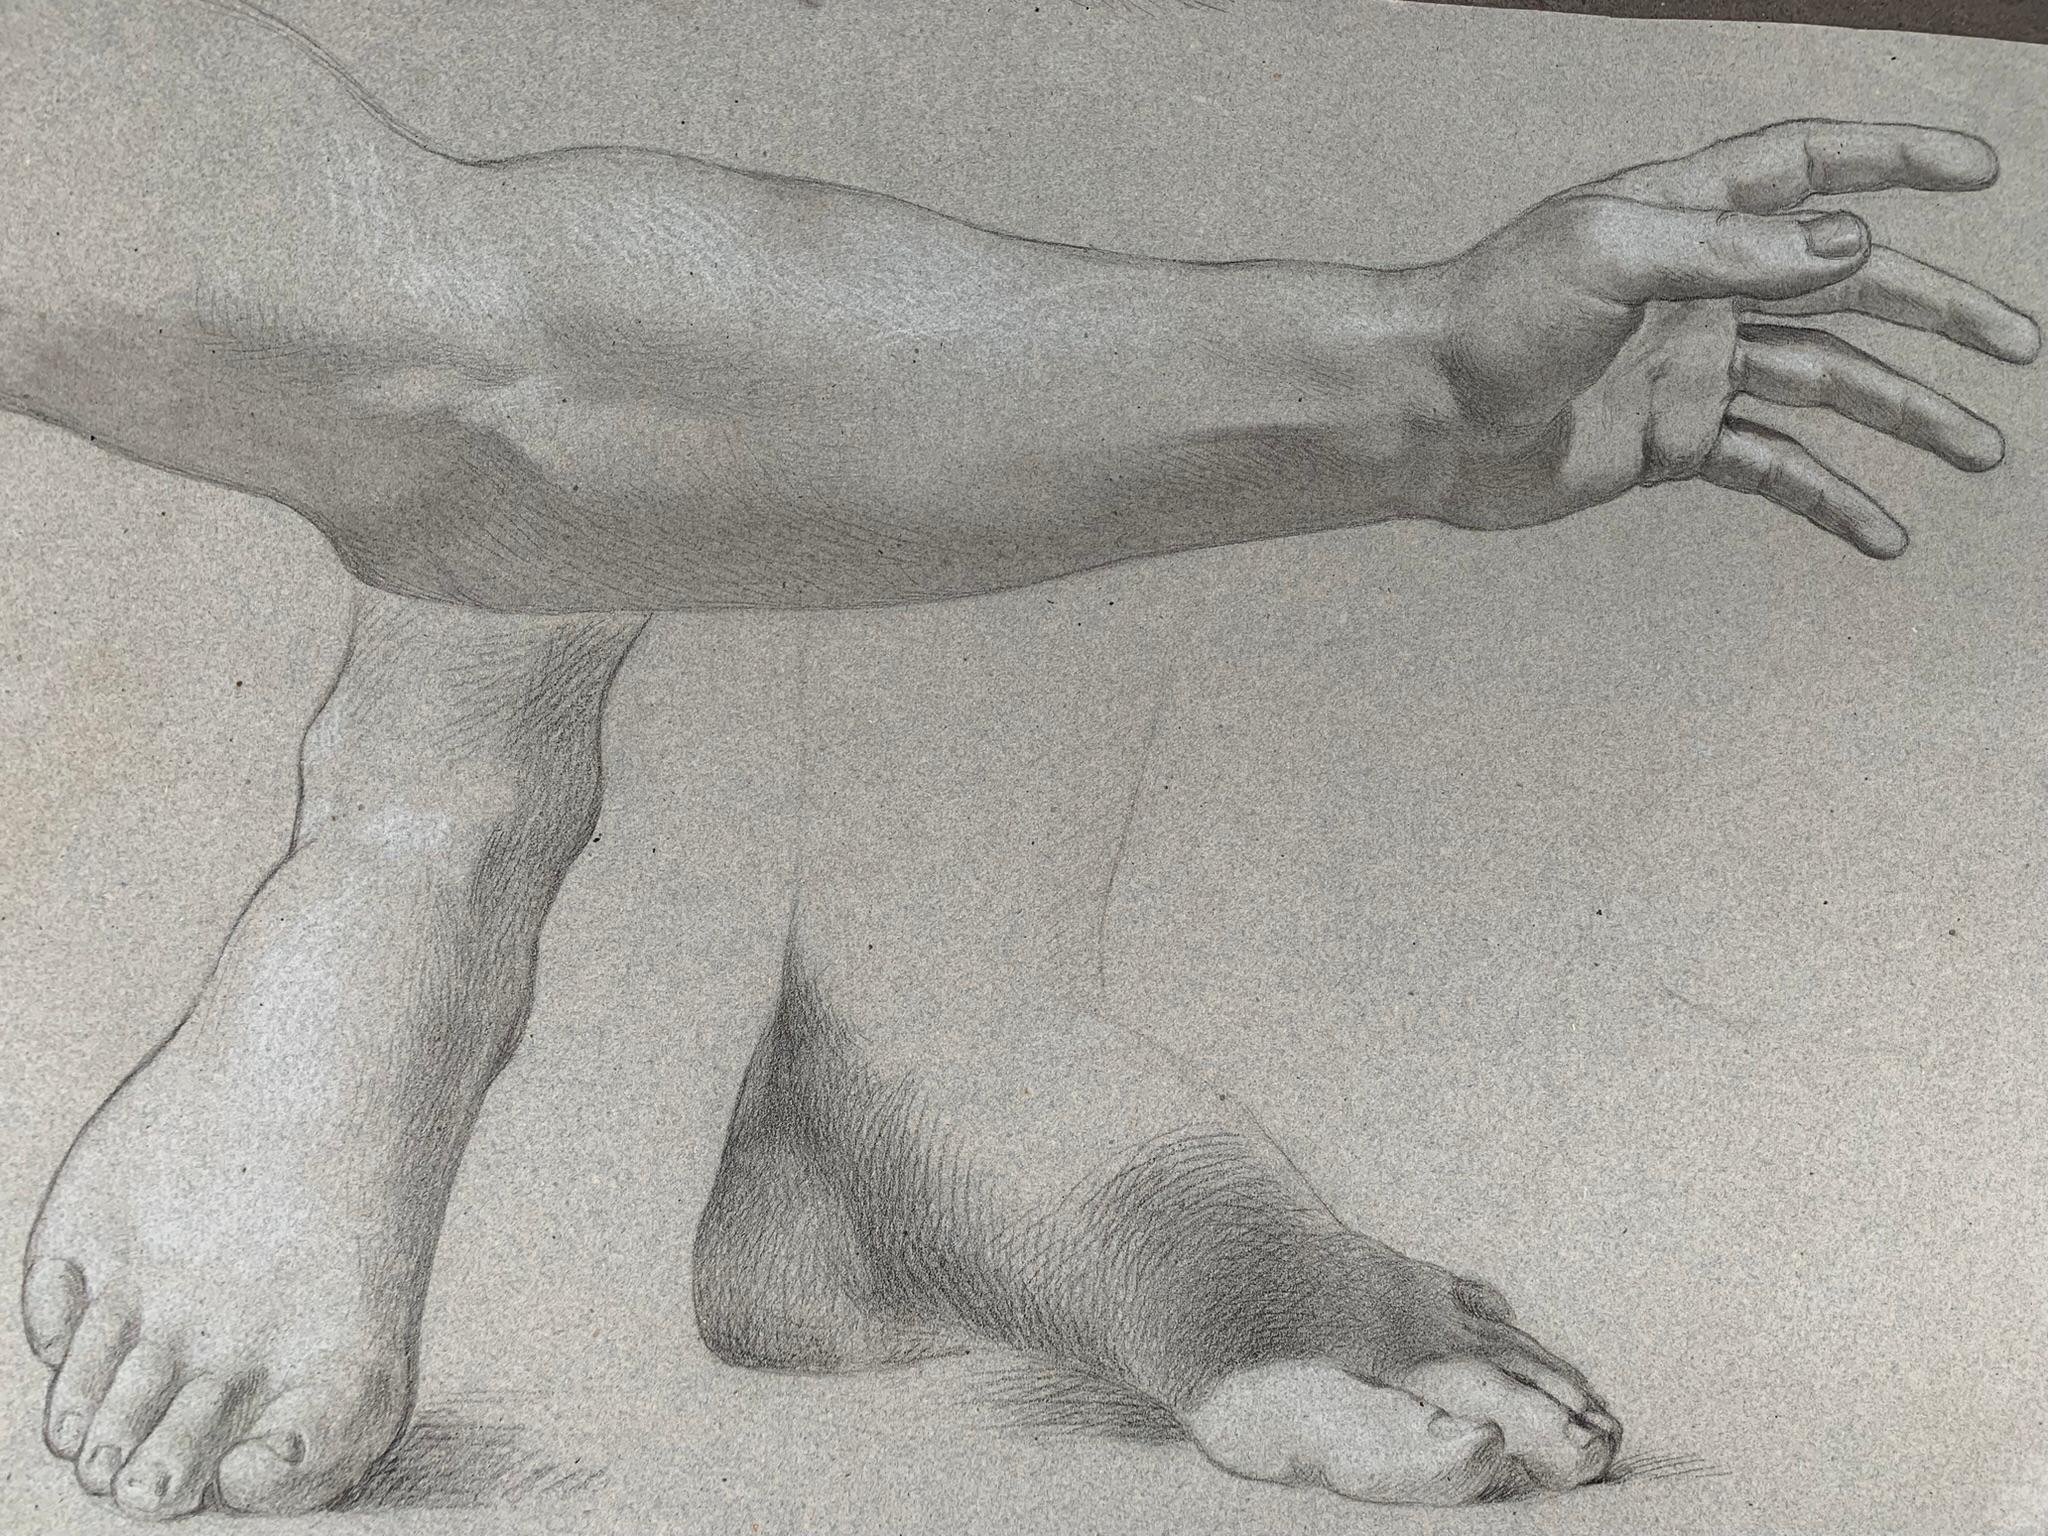 19th century Italian school drawing. Academic study of the figure of the young naked man.
Drawing made from two sides of the sheet of paper
On the other side two feet and an arm are represented with great skill and excellent technique.
A very light